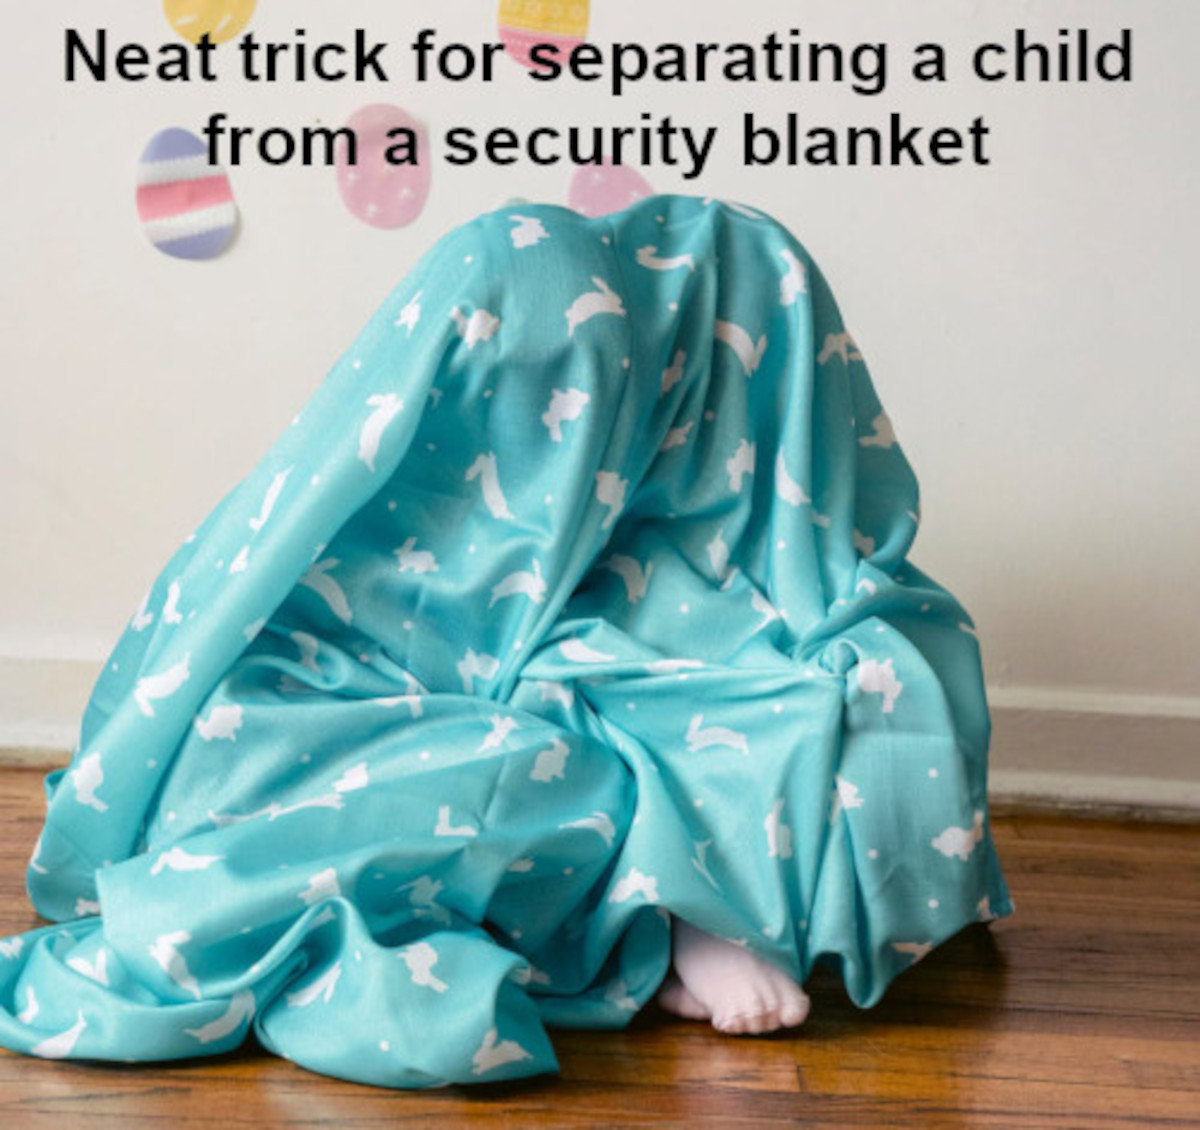 Here's a neat trick for ending your child's attachment to a security blanket at oddfactfinder.com/security-blank… (#blanket, #securityBlanket, #child, #children, #parenting, #childRearing, #psychology, #childPsychology, #mother, #mothering)